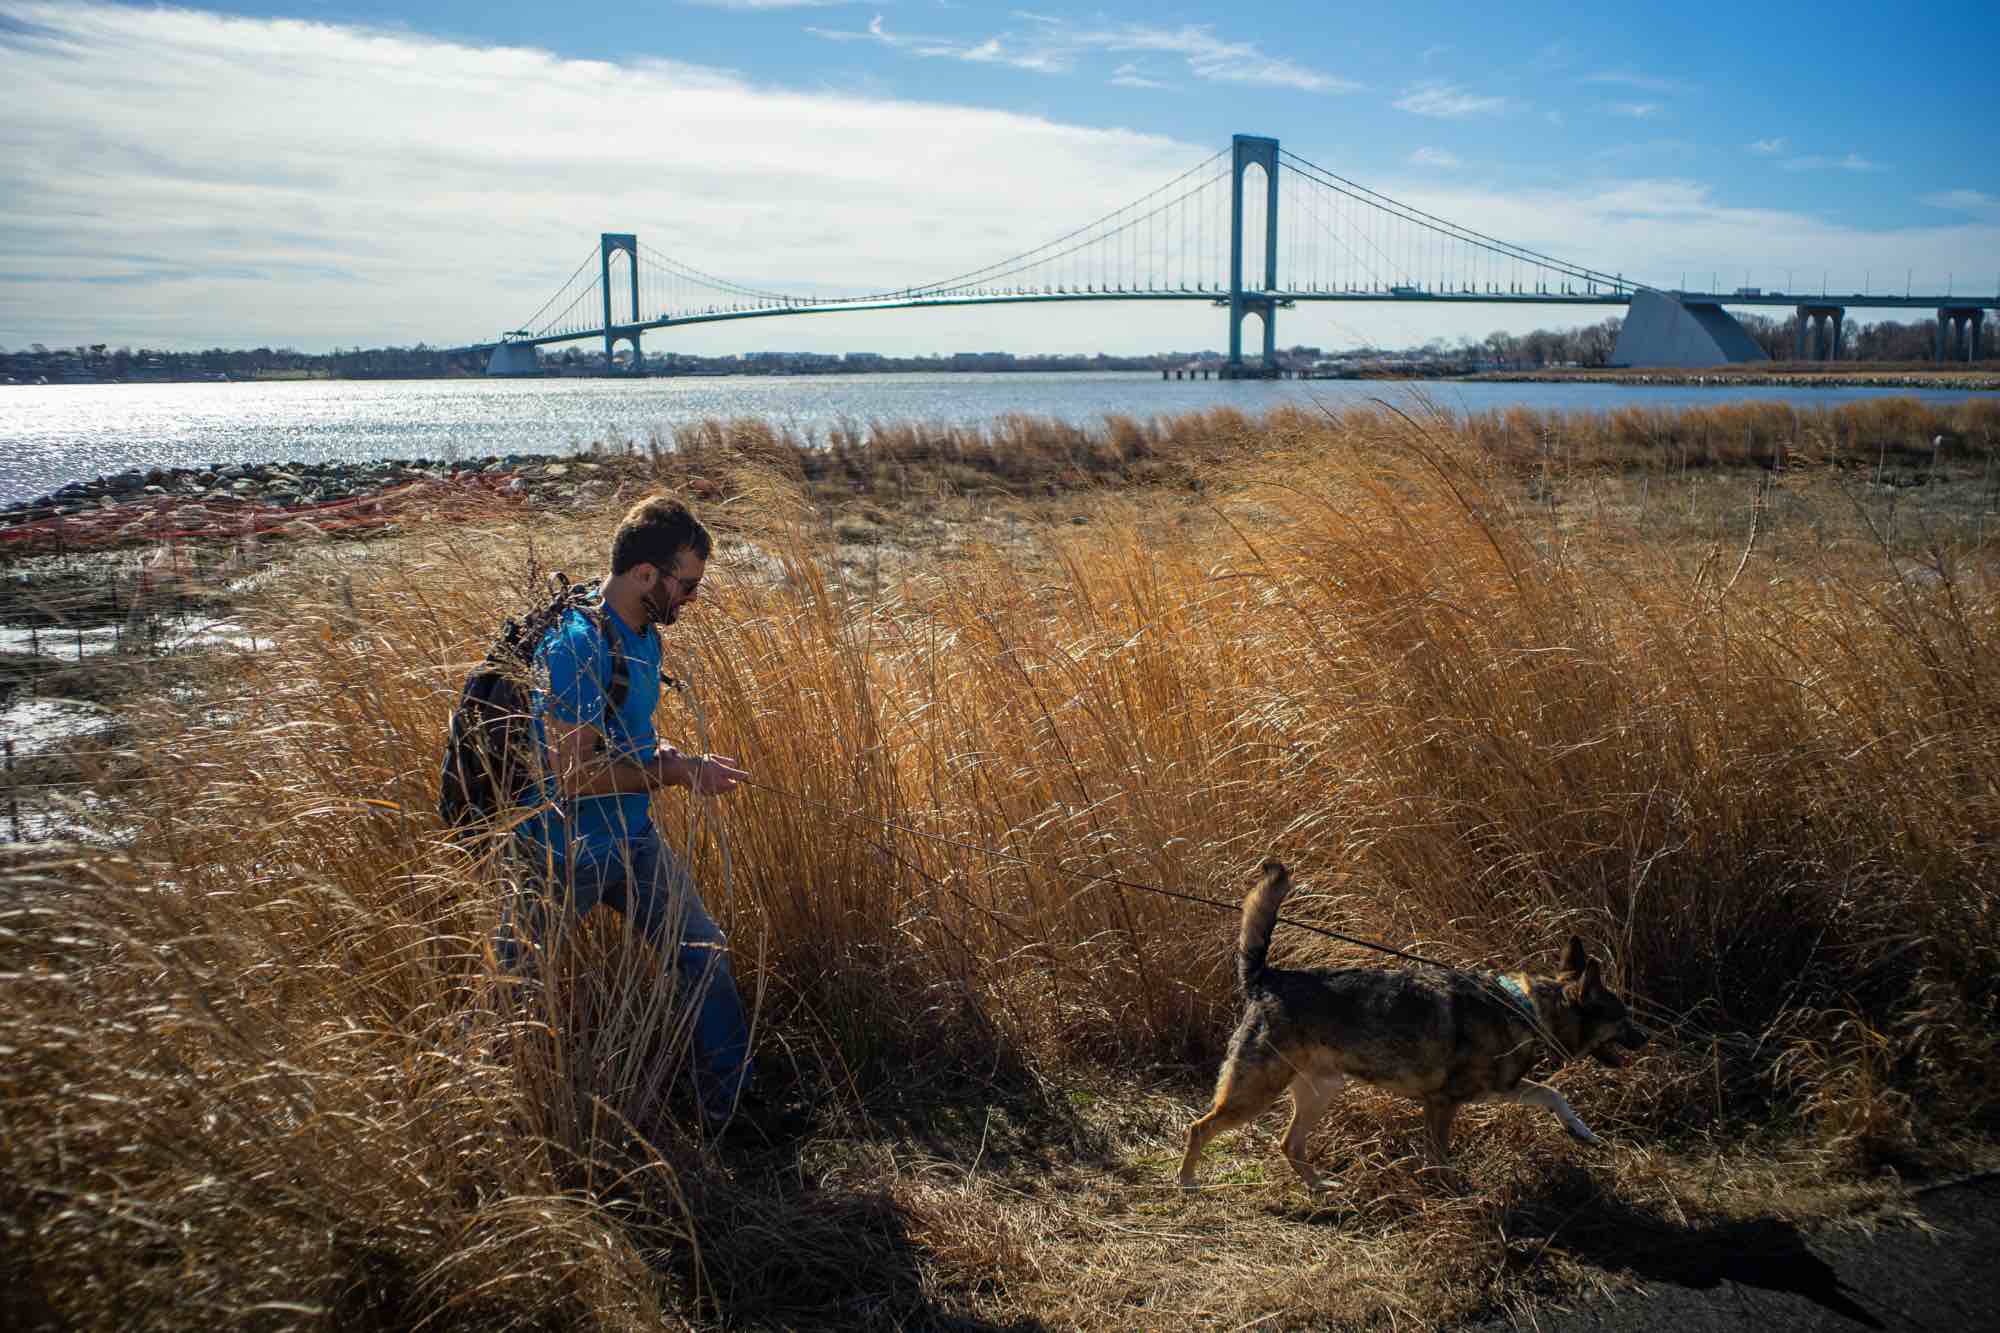 Chris Nagy, wildlife biologist and the co-founder of the Gotham Coyote Project, with his dog Ethan. In both Ferry Point Park and Pelham Bay Park in the Bronx, he collects coyote scat and sets up trail cameras that are automatically triggered by movement.